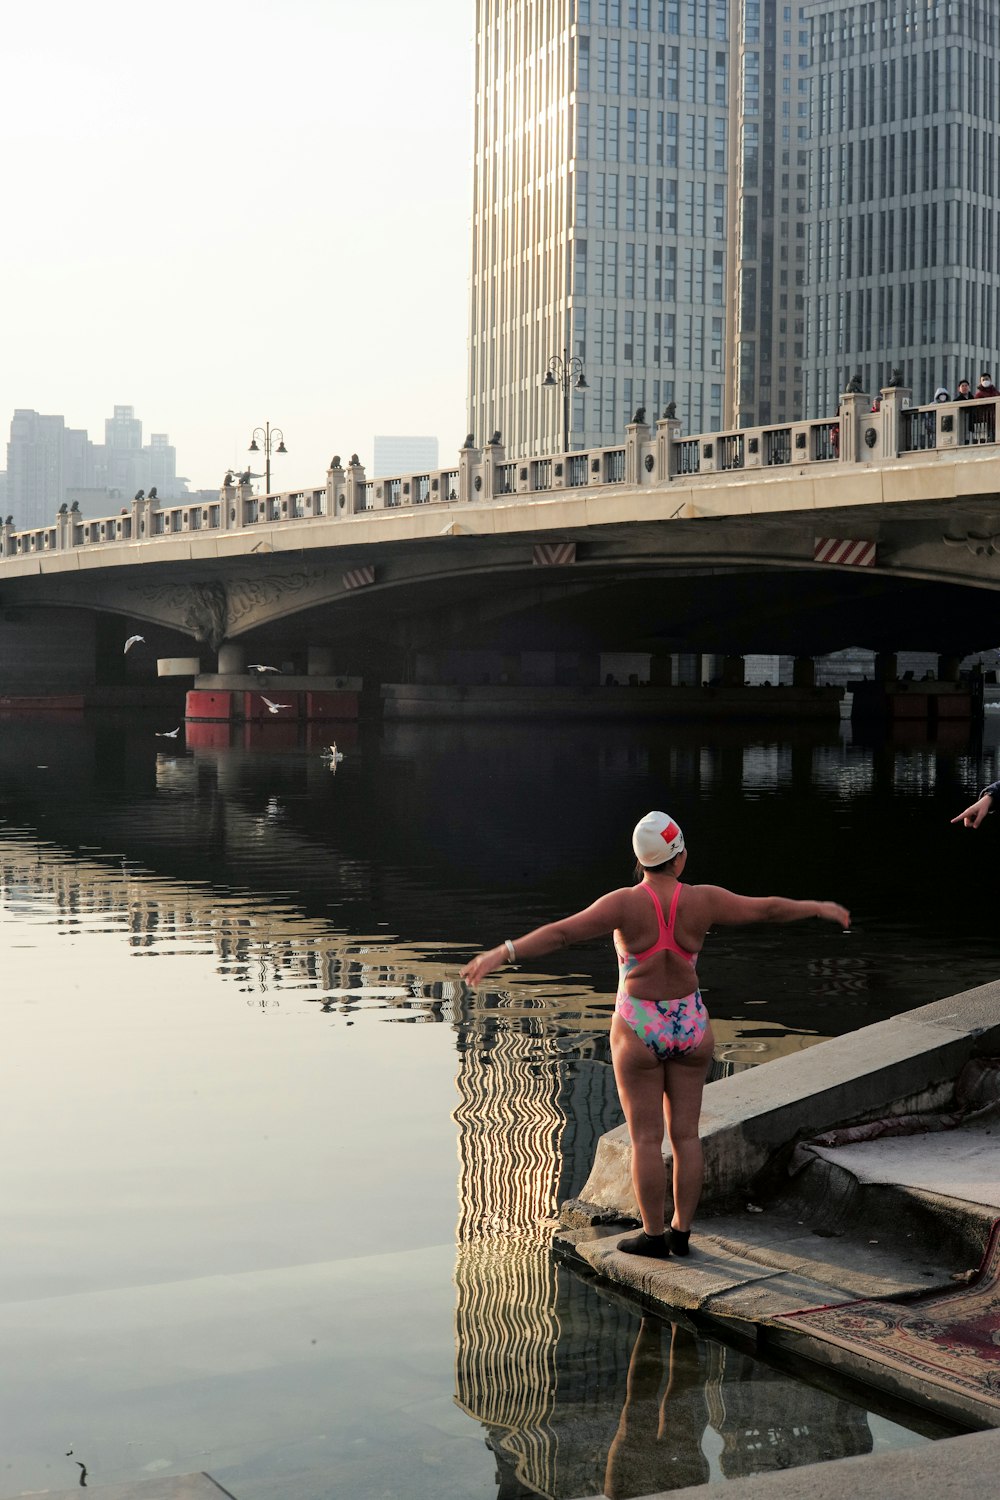 a woman in a bathing suit standing on a dock next to a body of water